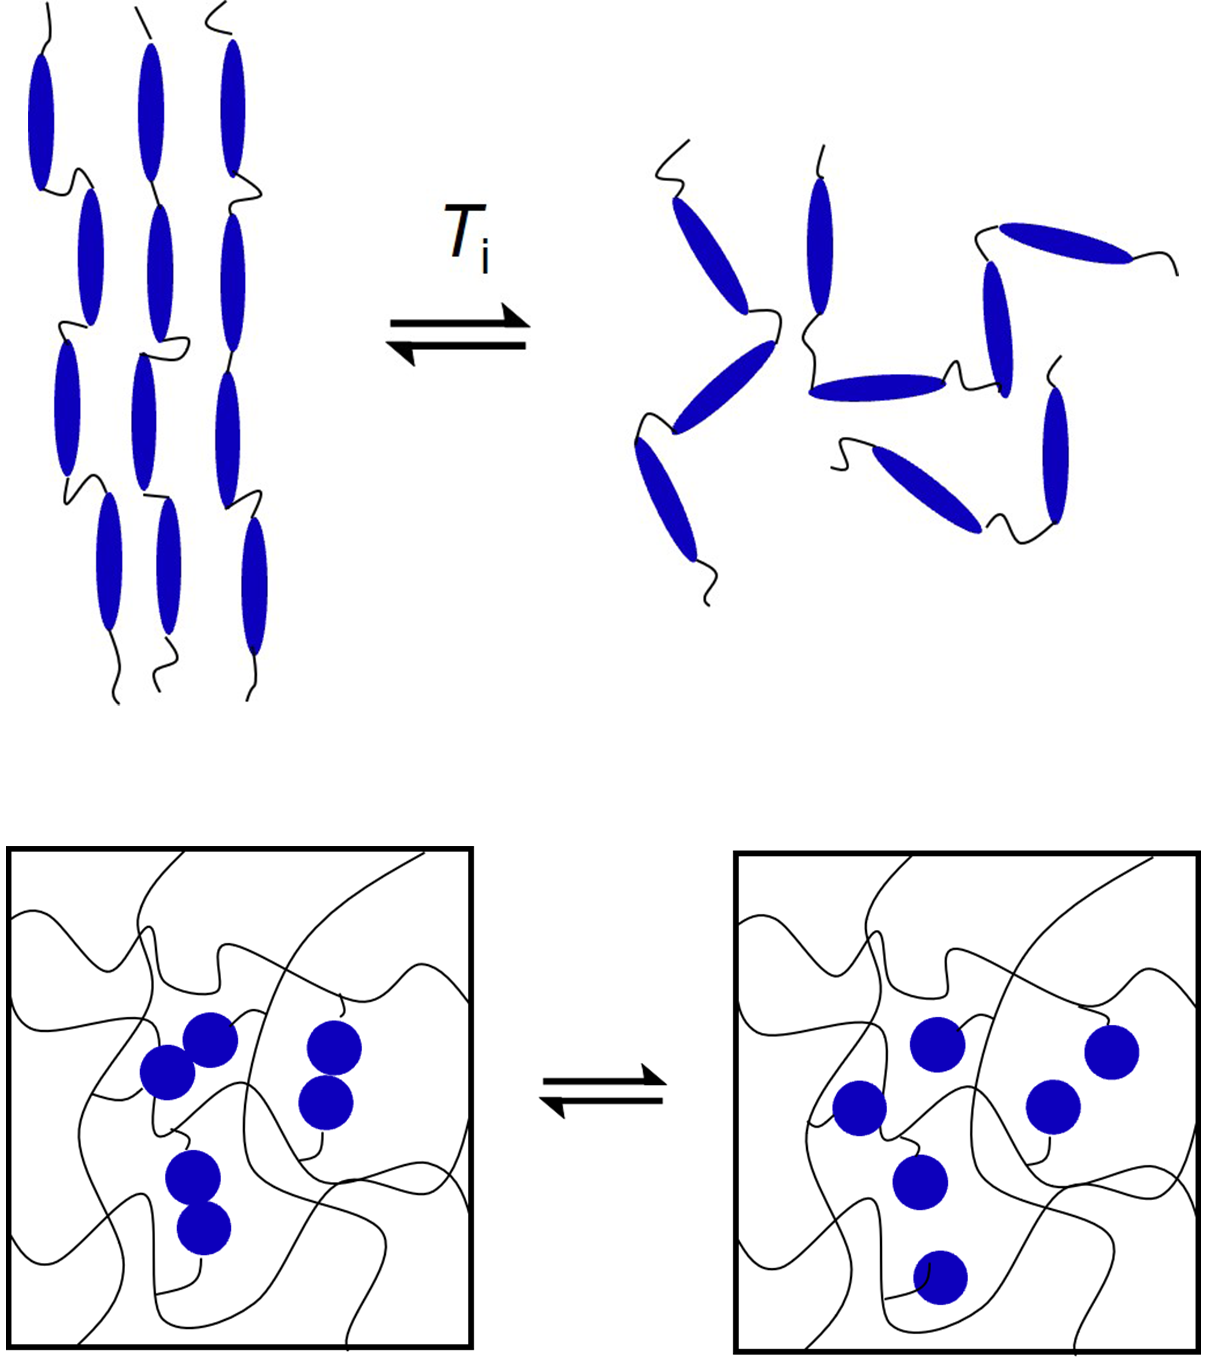 Diagram of liquid crystalline elastomers and dynamic covalent bonds 